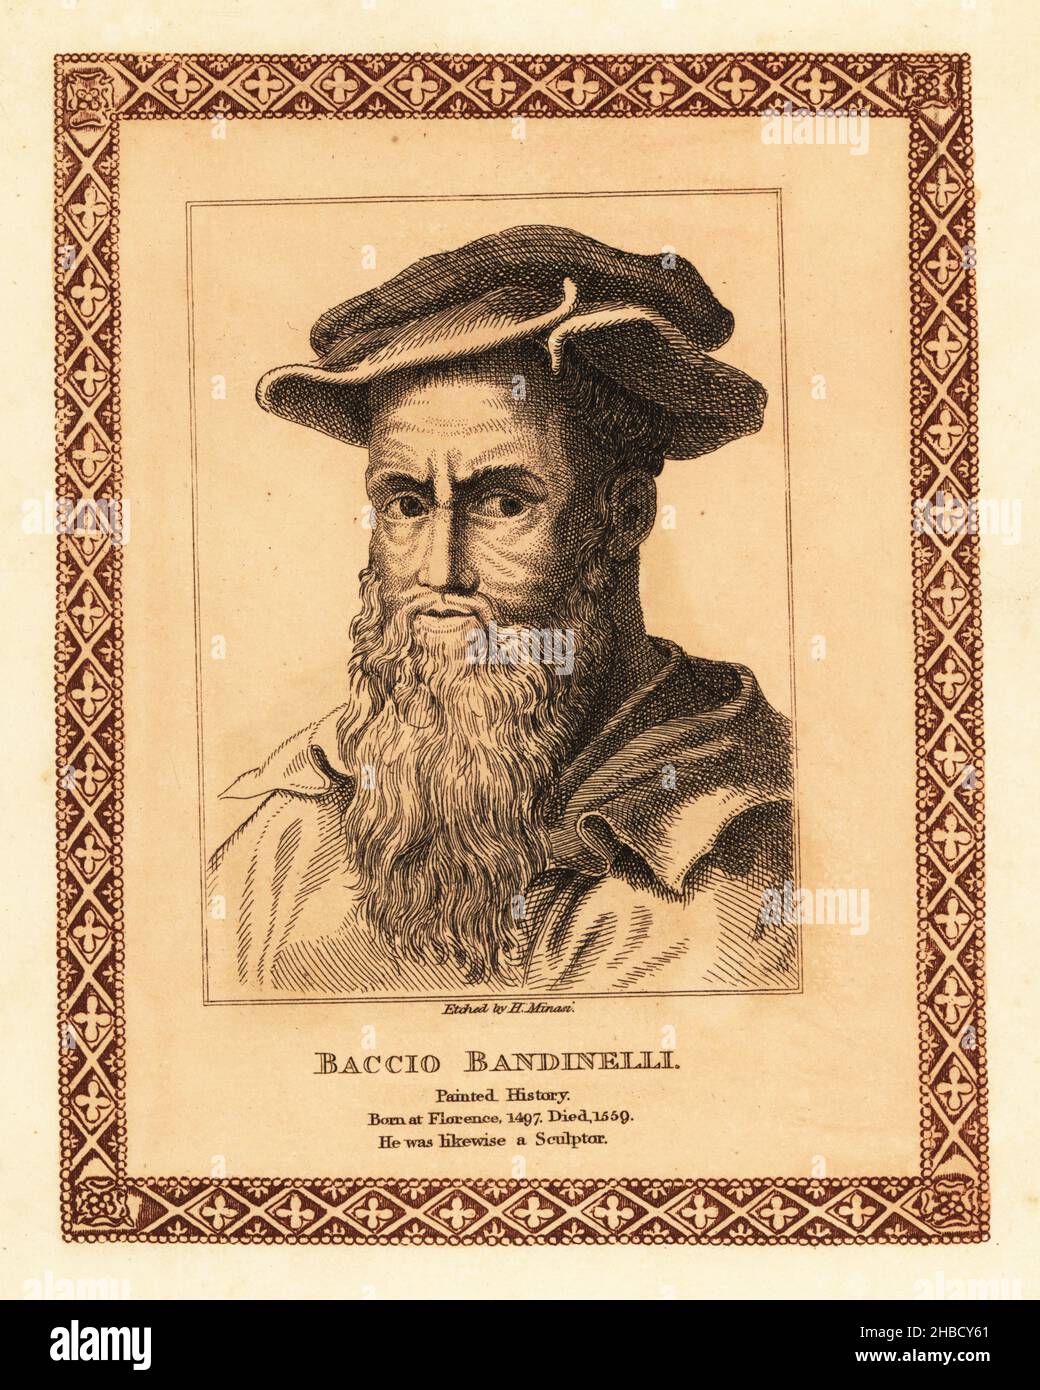 Baccio Bandinelli, Italian Renaissance history painter, draughtsman and sculptor, 1493-1560. Tinted etching within a decorative border by H. Minasi after a portrait by Niccolo della Casa from John Girtin’s Seventy-Five Portraits of Celebrated Painters from Authentic Originals, J. M’Creery, London, 1817. Stock Photo